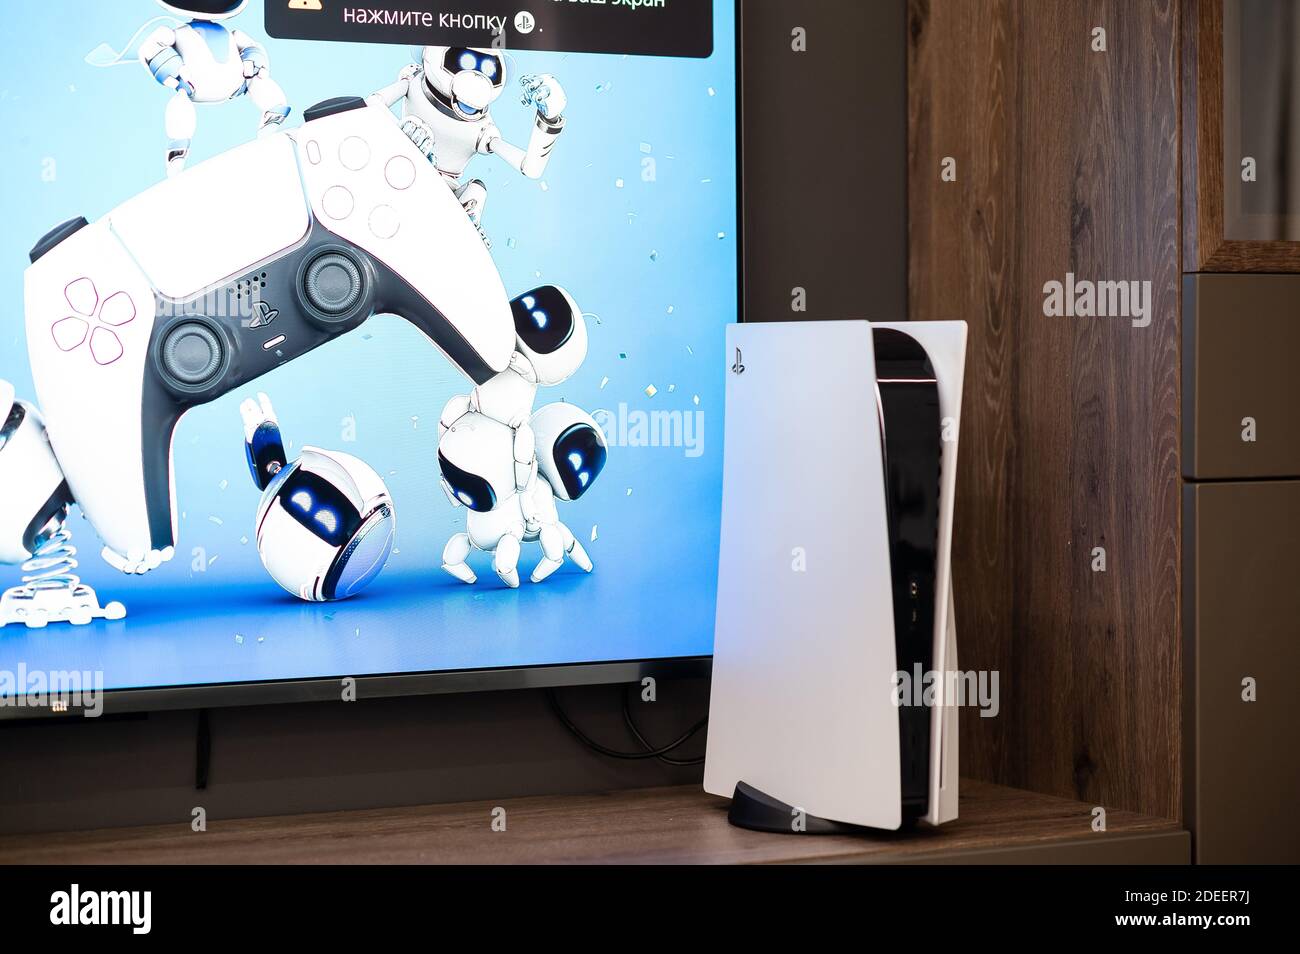 Moscow - November 28 2020: the brand new Sony PlayStation 5 gaming console  with DualSense controller near tv screen at home ready to use Stock Photo -  Alamy